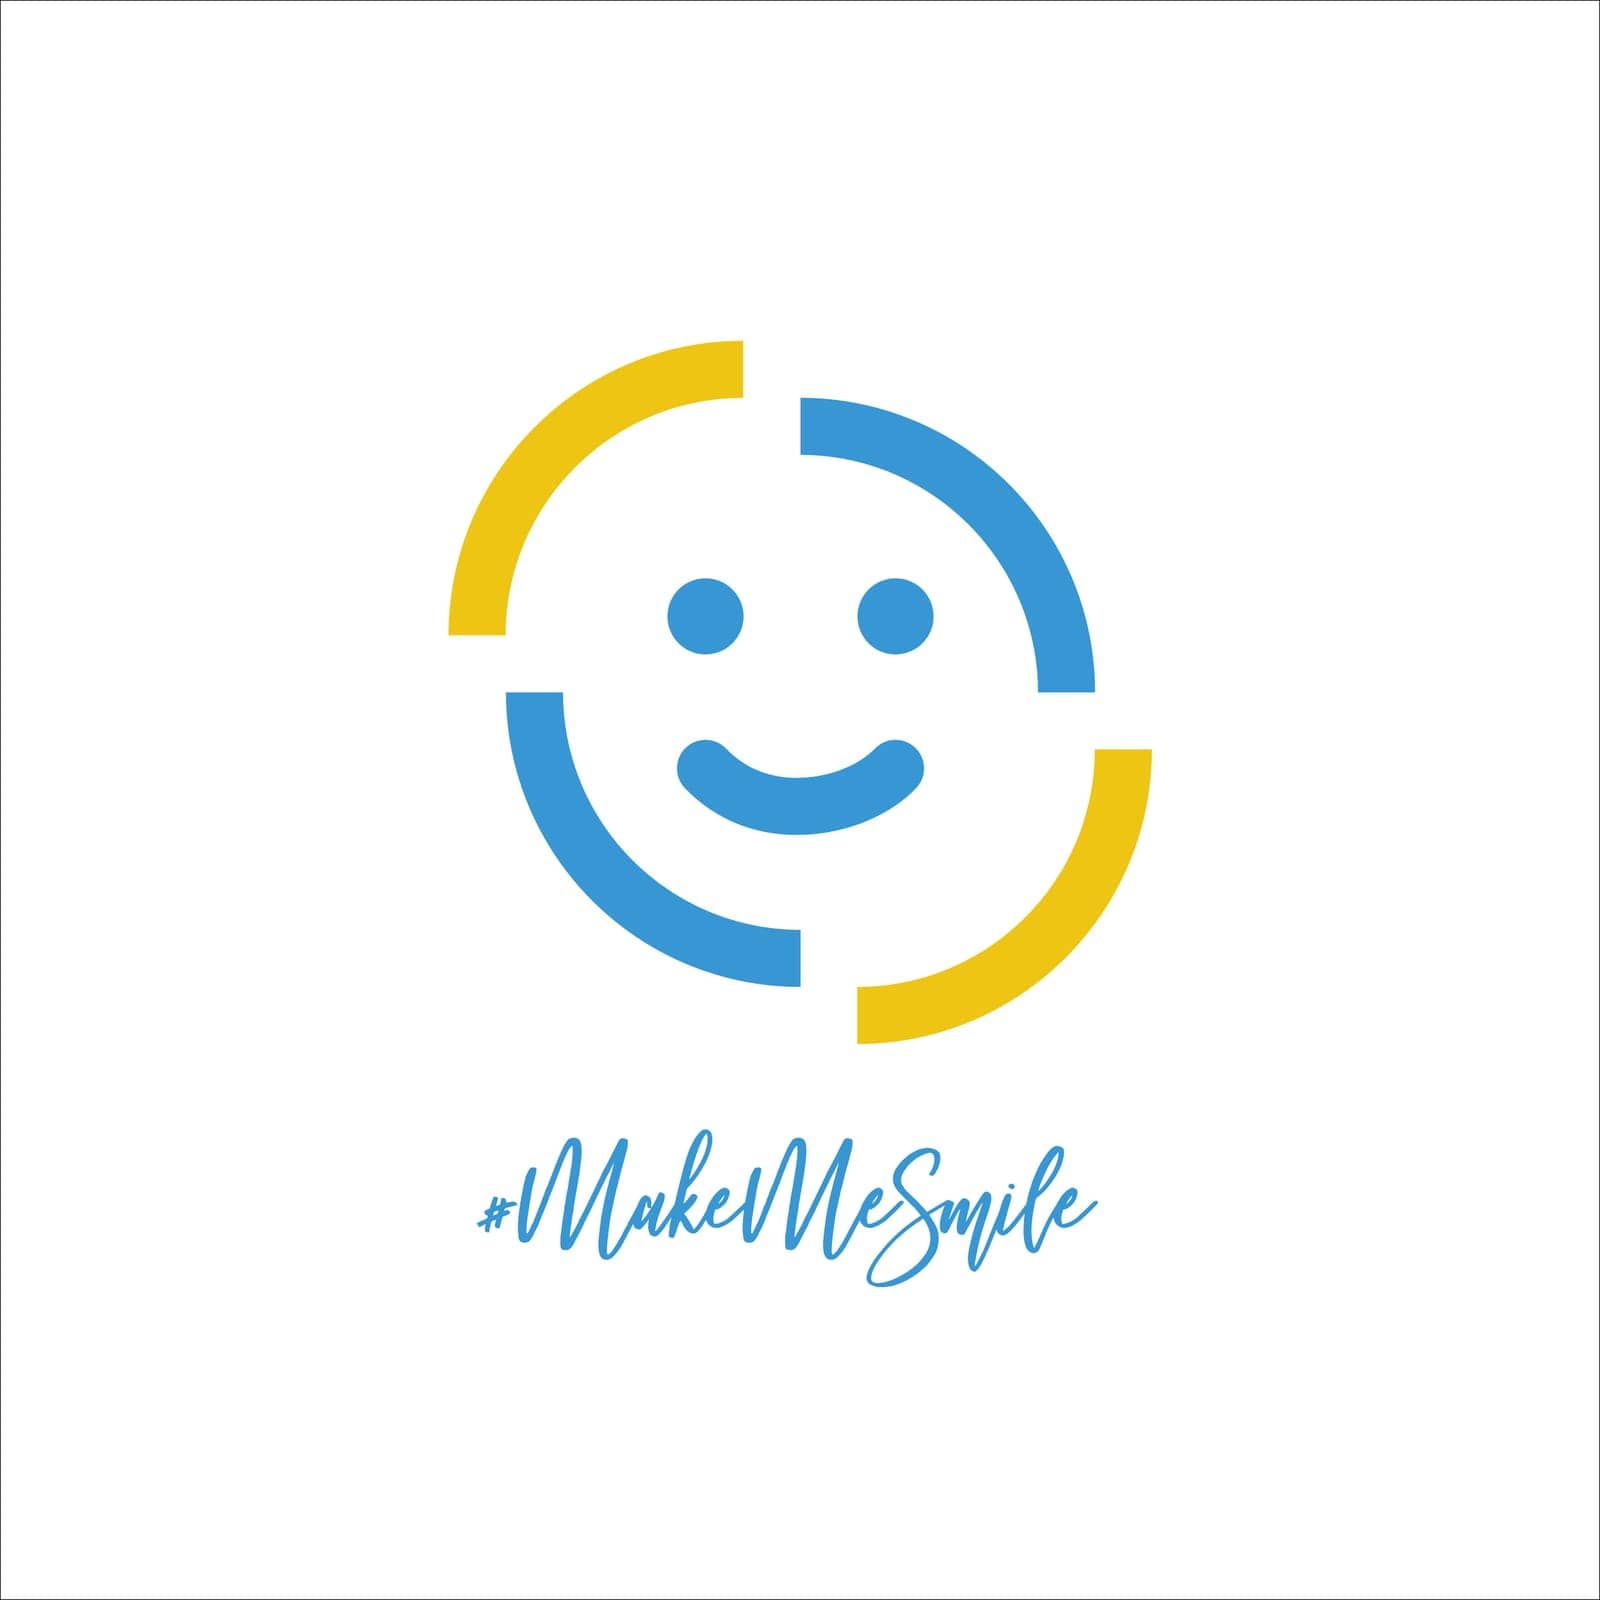 Happy smile face abstract design logo template in blue and yellow colors. Make me smile motivation. emotion logo. Stock vector illustration isolated on white background. by Kyrylov